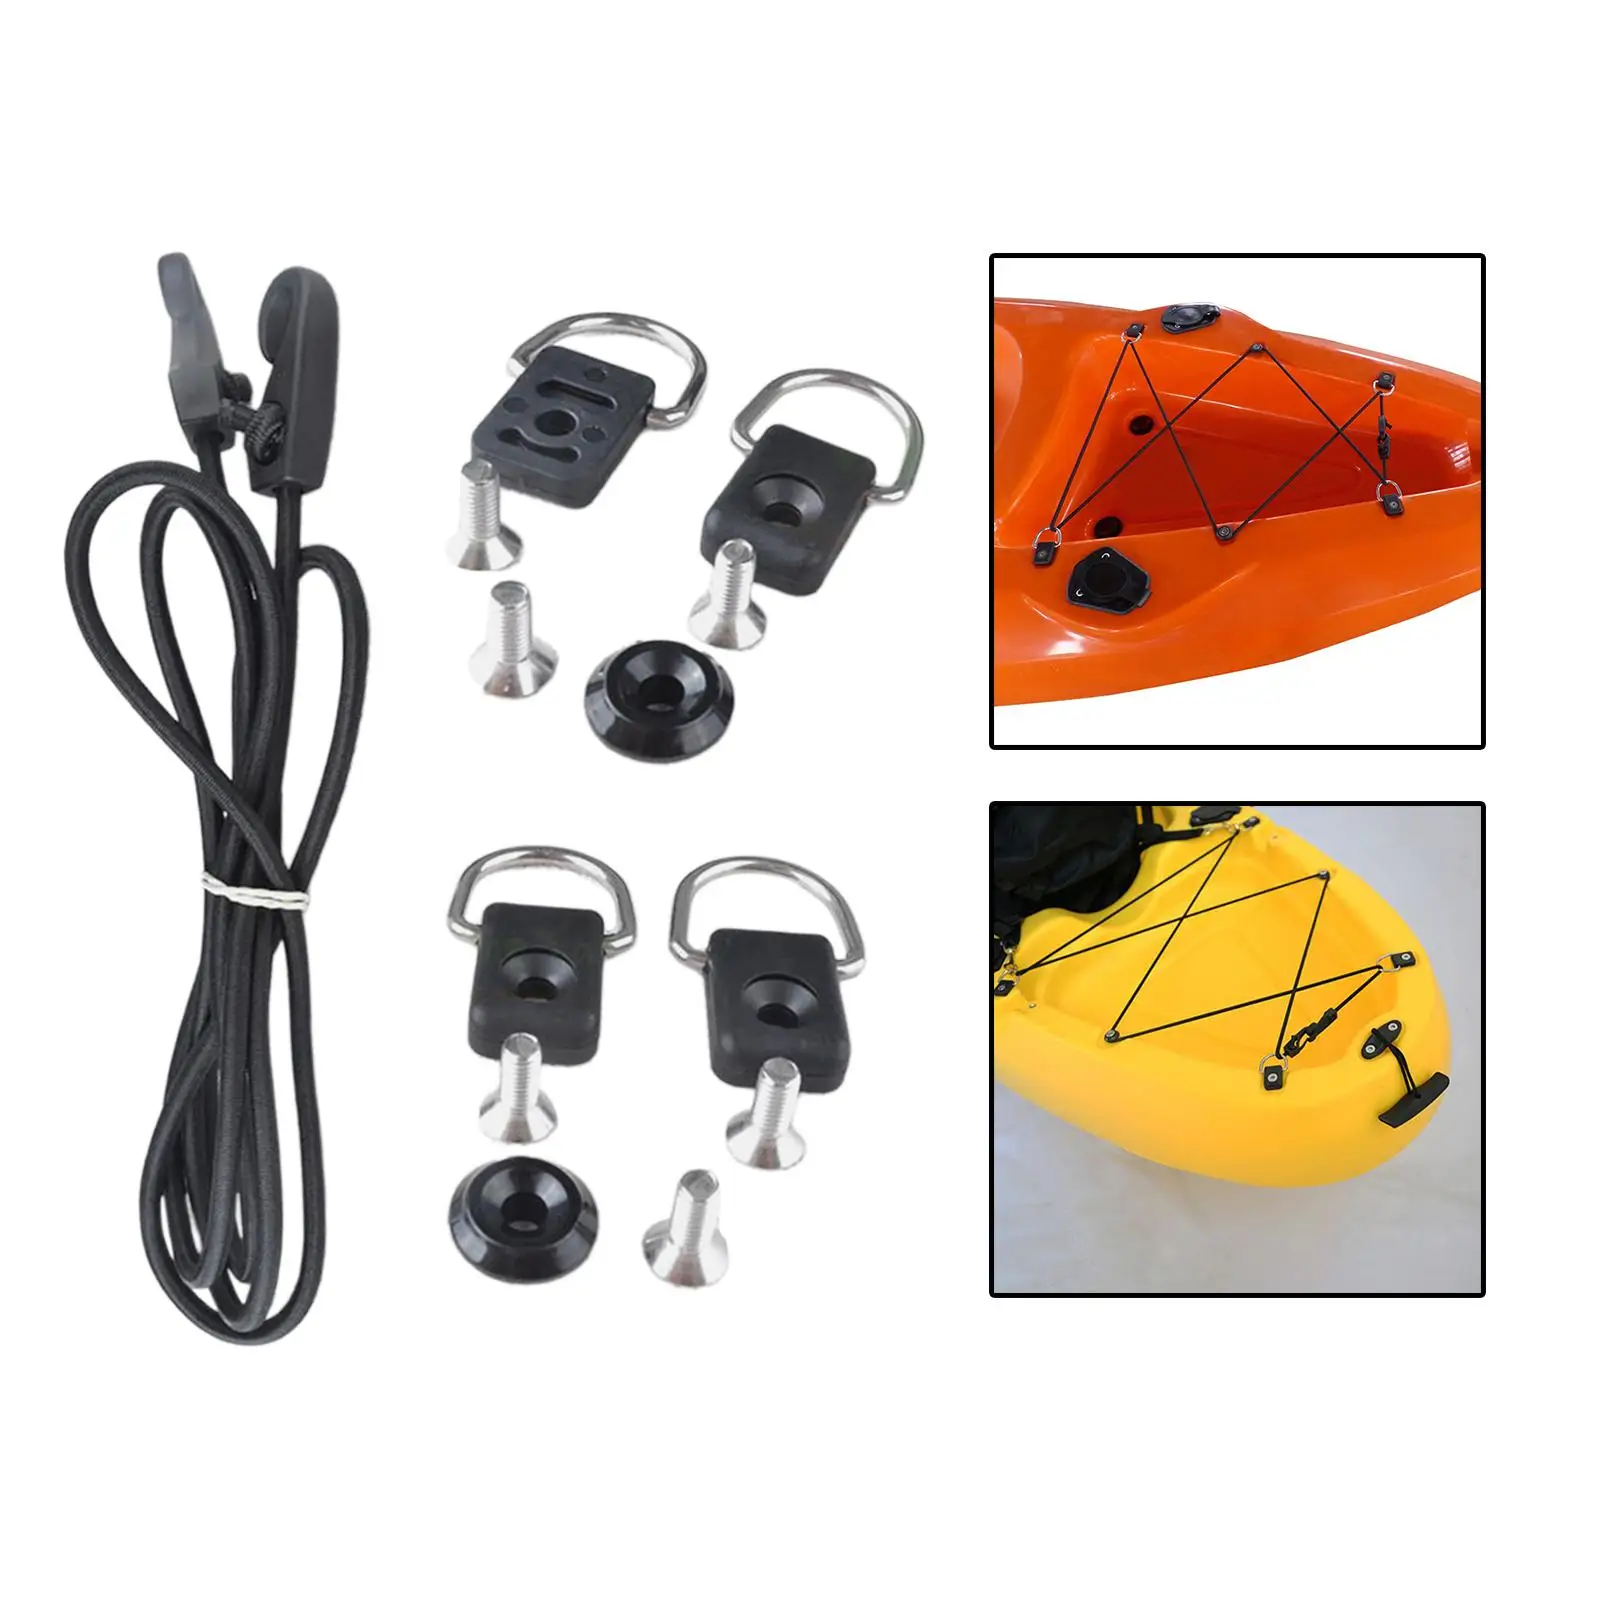 Kayak Deck Rigging Kit Bungee Cord Installation Deck Fitting Fishing Rigging Bungee Kit Accessory for SUP Surfboard Sailing Boat